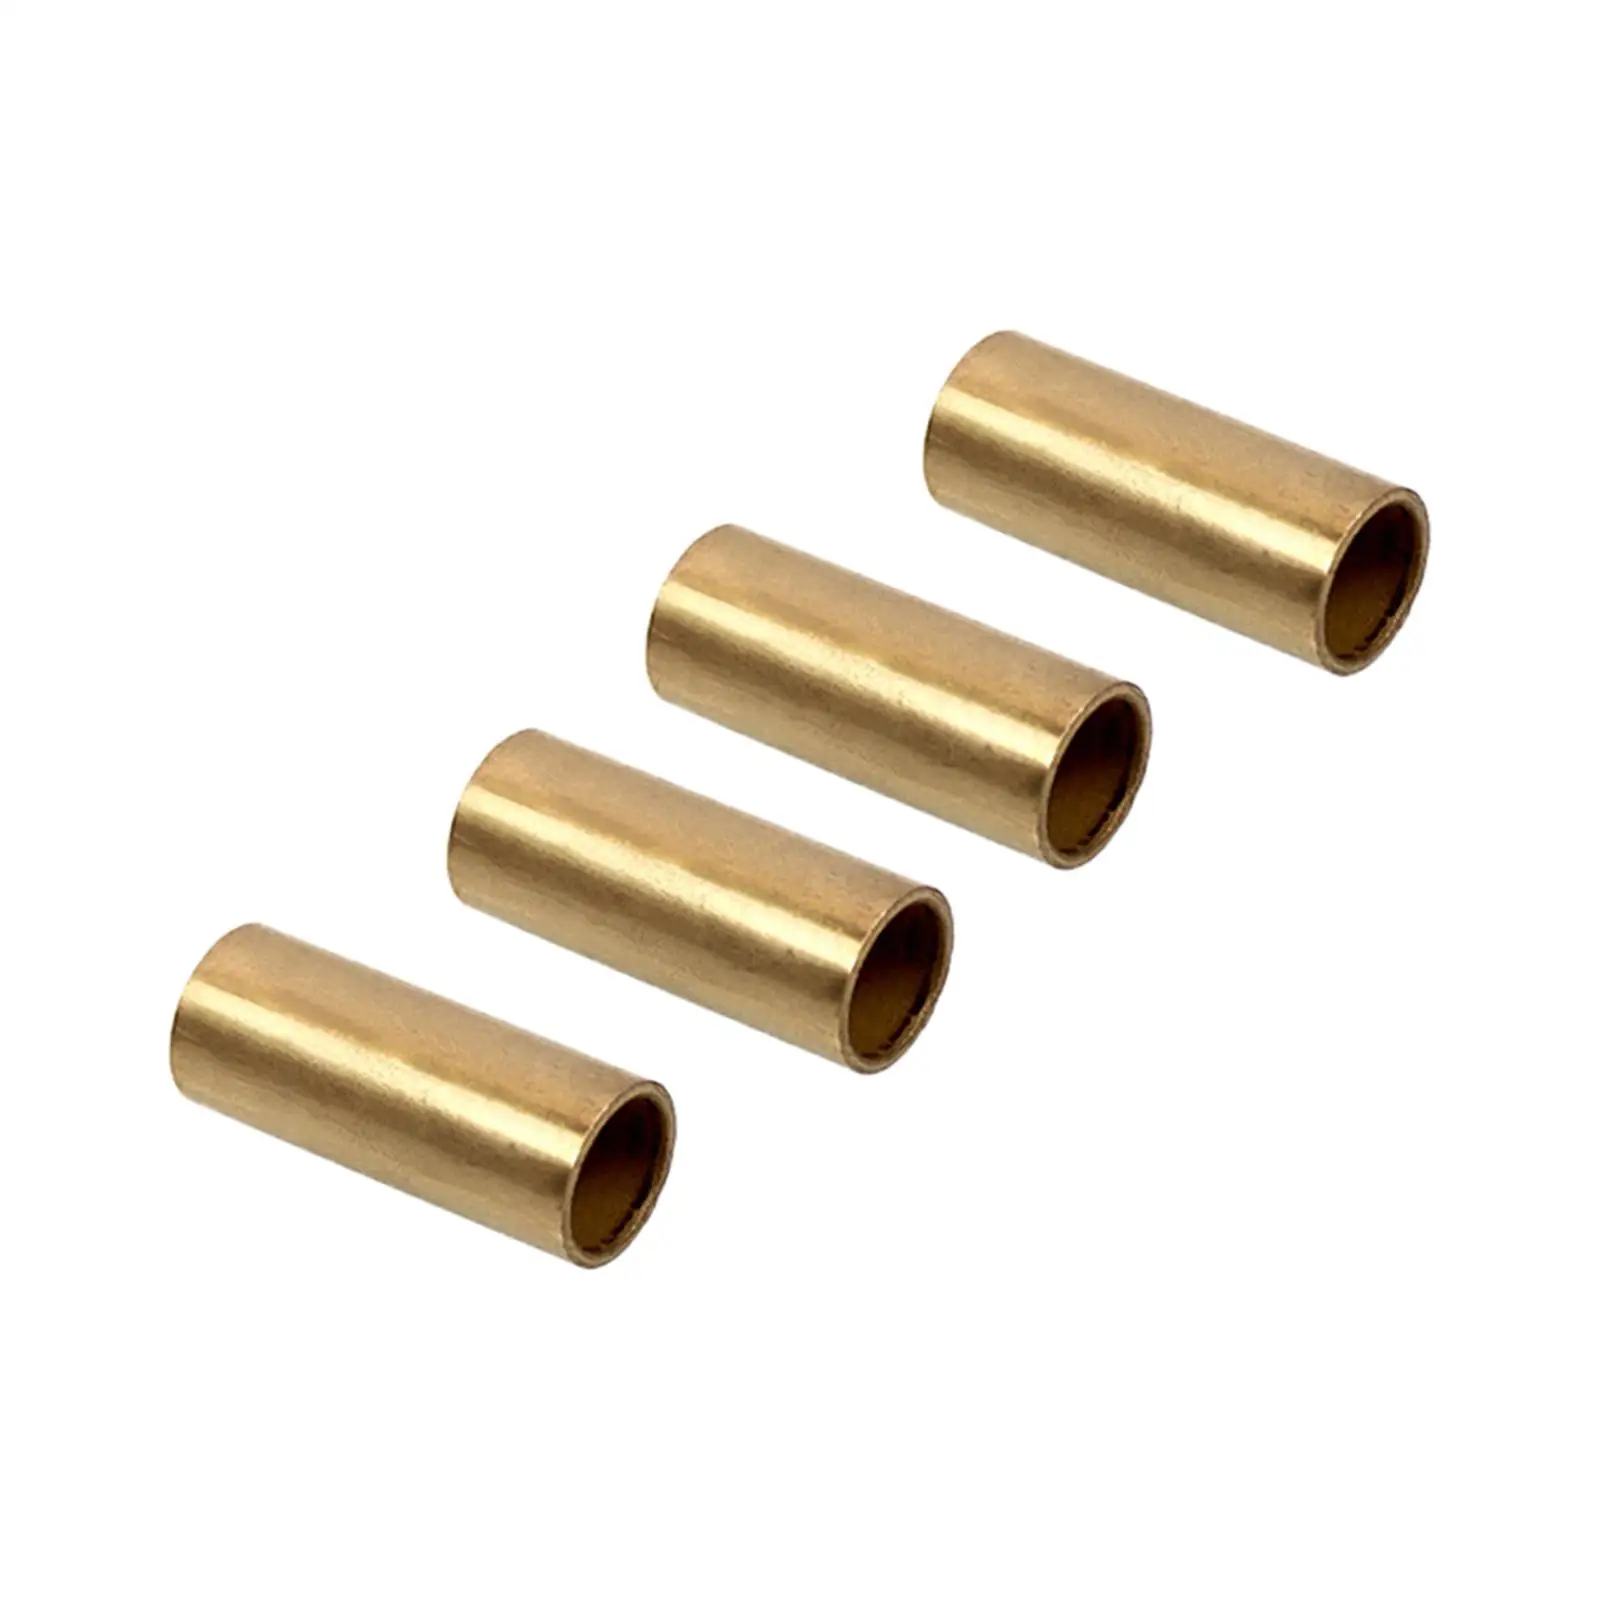 4x Bronze Leaf Spring Shackle Bushings K71-291-00 Direct Replaces Strong Parts